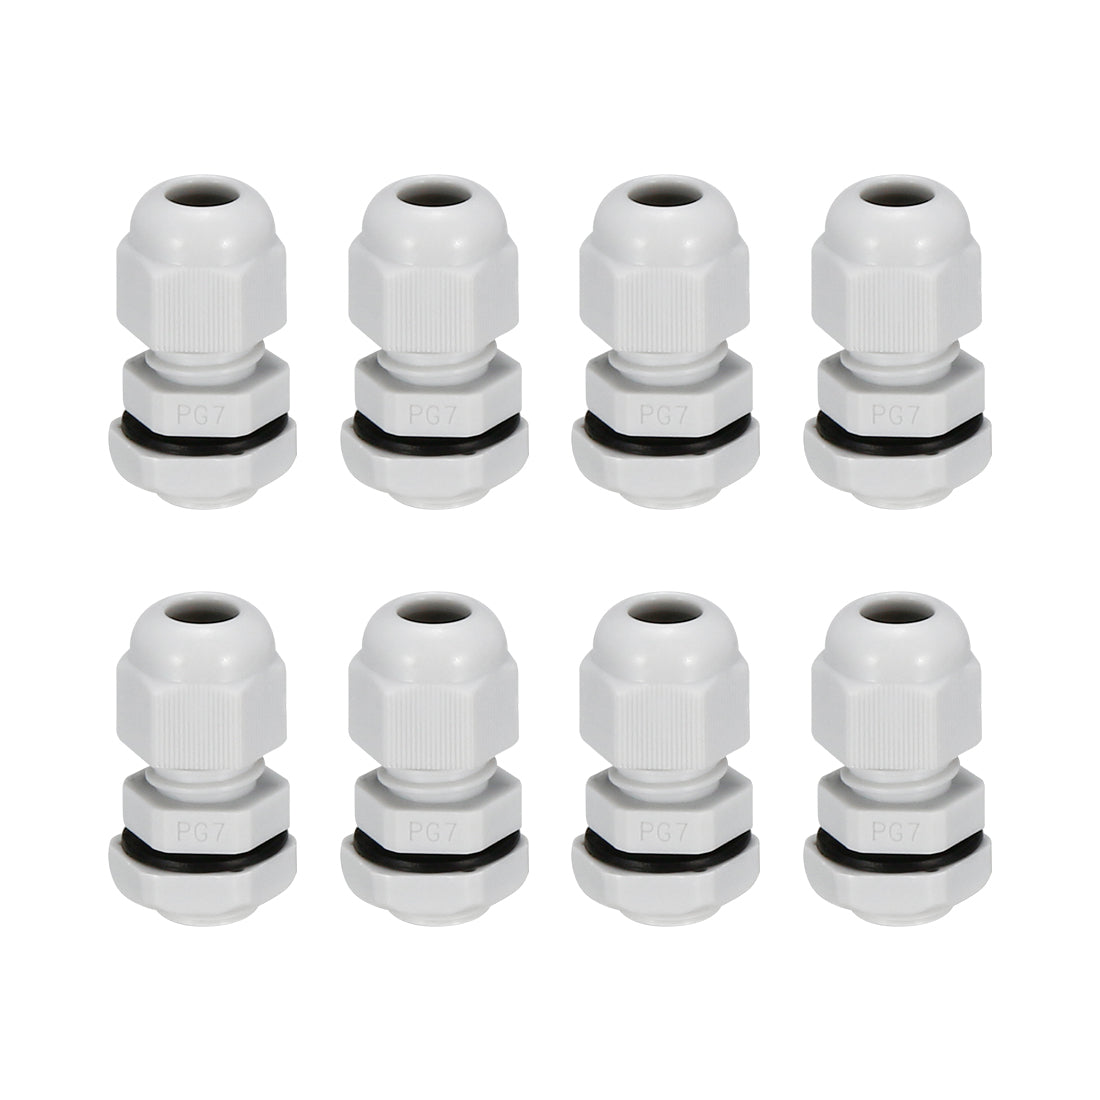 uxcell Uxcell 8Pcs PG7 Cable Gland Waterproof Connector Plastic Wire Glands Joints White for 3-6.5mm Dia Wires